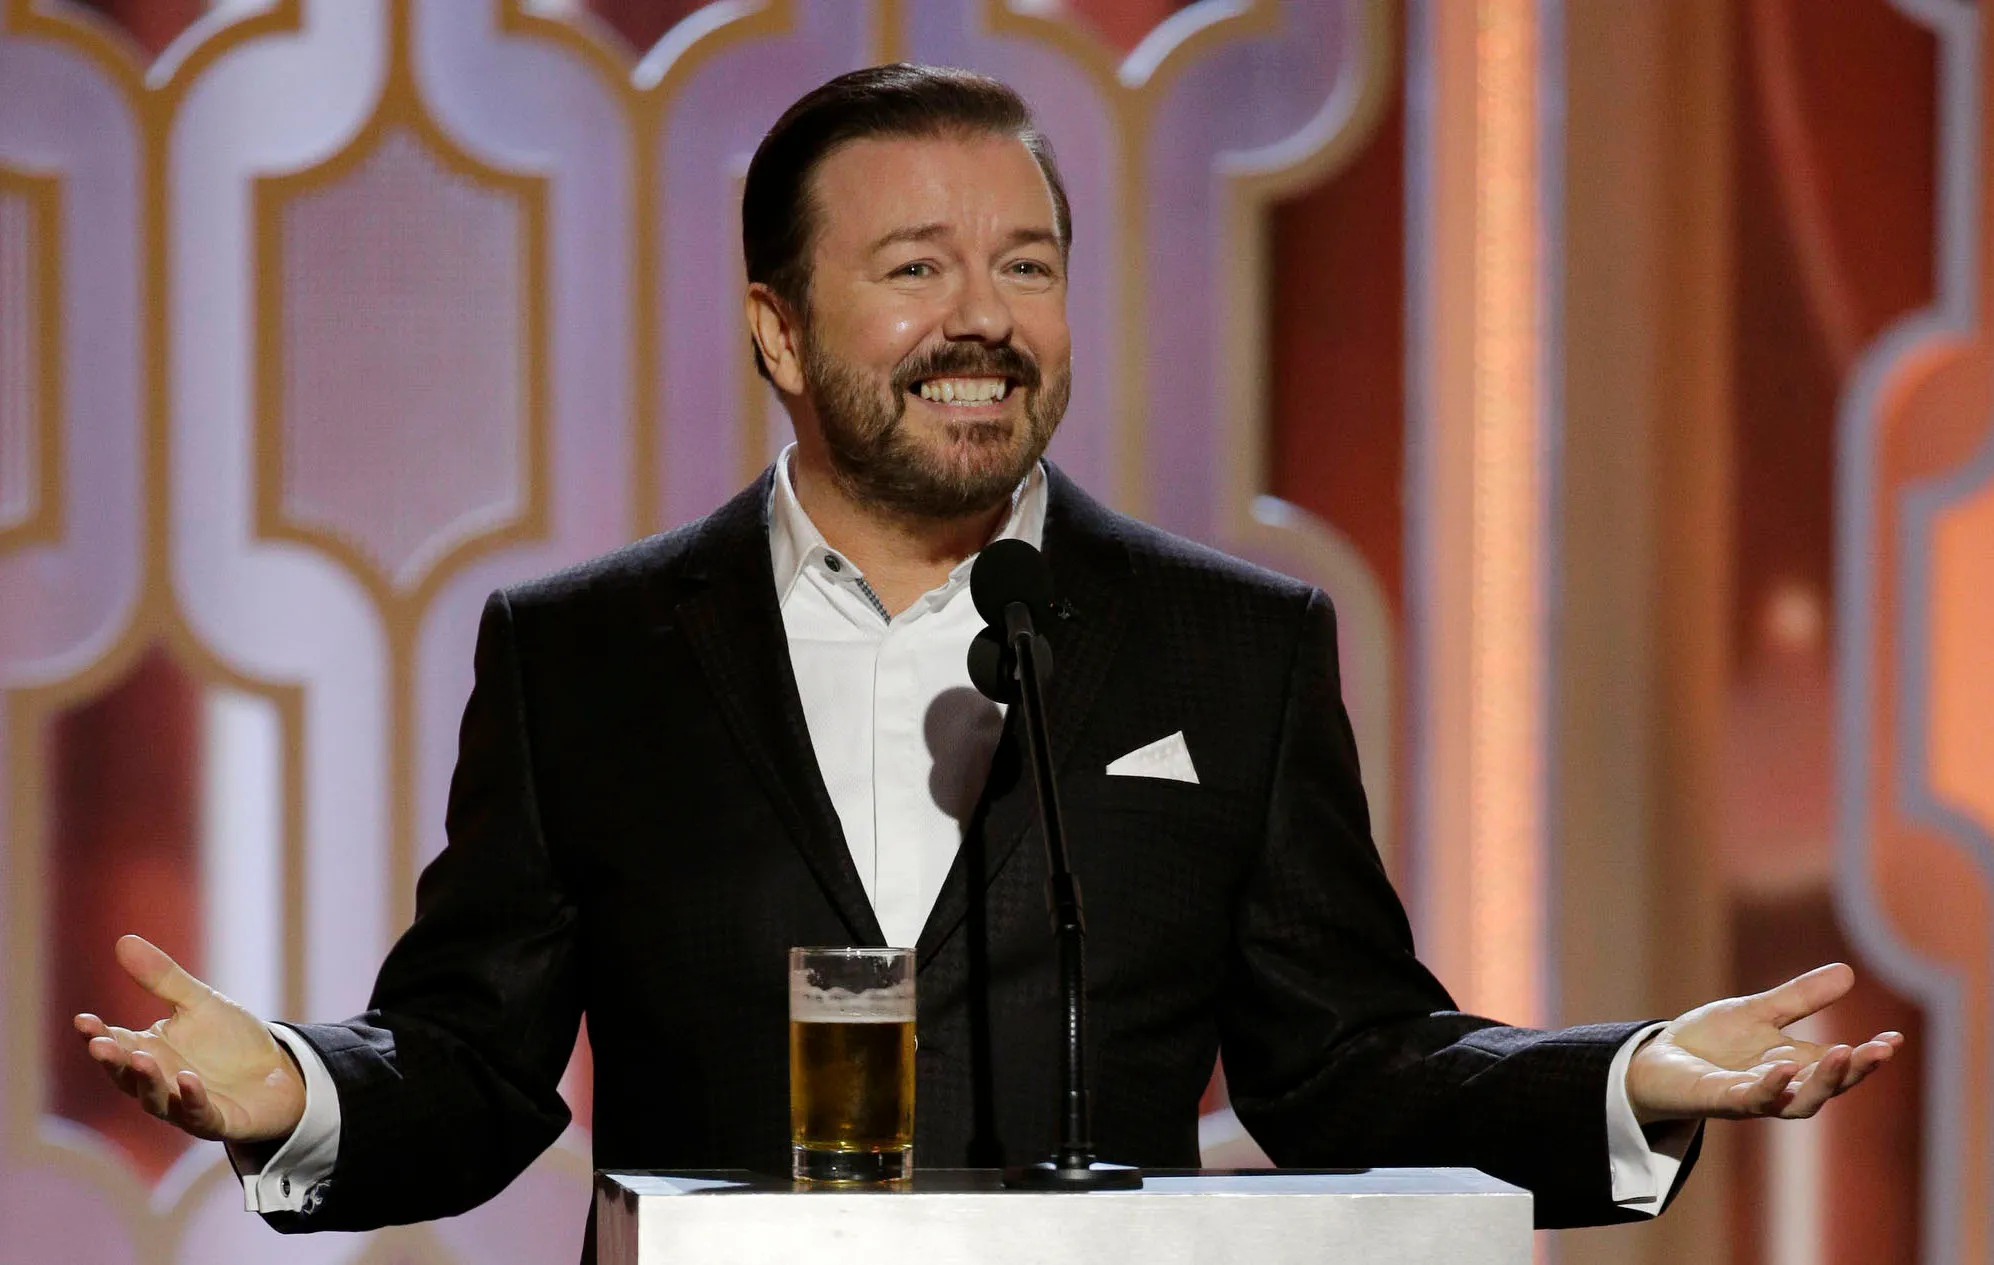 Comedian and actor Ricky Gervais, famous for series such as 'After Life' and 'Office', donated 1.9 million pounds of income from his latest stand-up show 'Armageddon' to 11 animal protection associations working worldwide for animal welfare on 8 December. Gervais made a humorous statement on the subject.
